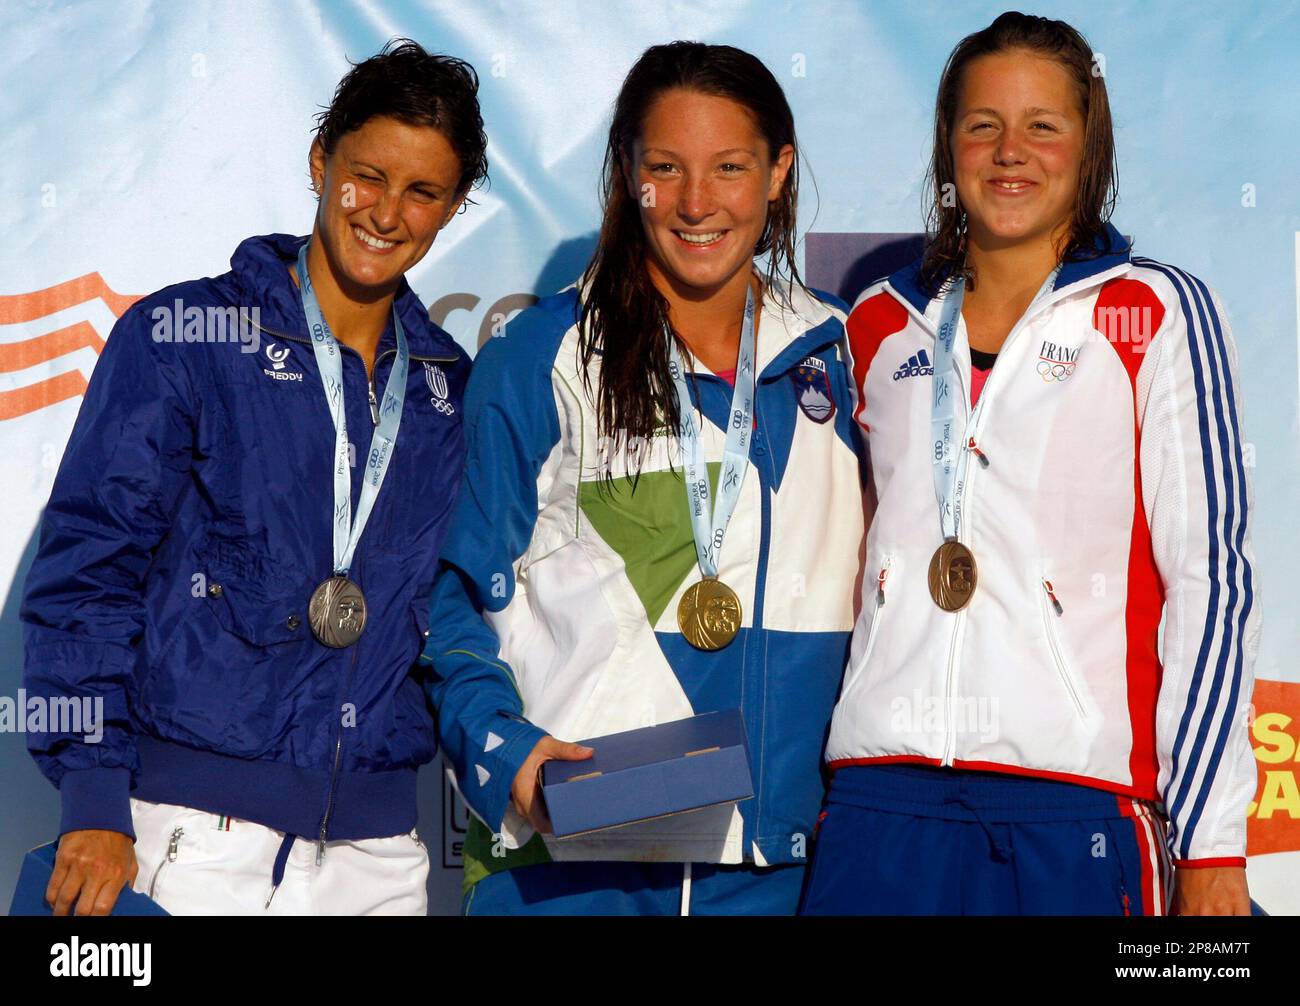 Second placed Francesca Segat, left, and third placed Caterina Giacchetti,  both from Italy, pose with their medals after the winning ceremony for the  Women's 200 Meter Butterfly final race at the European